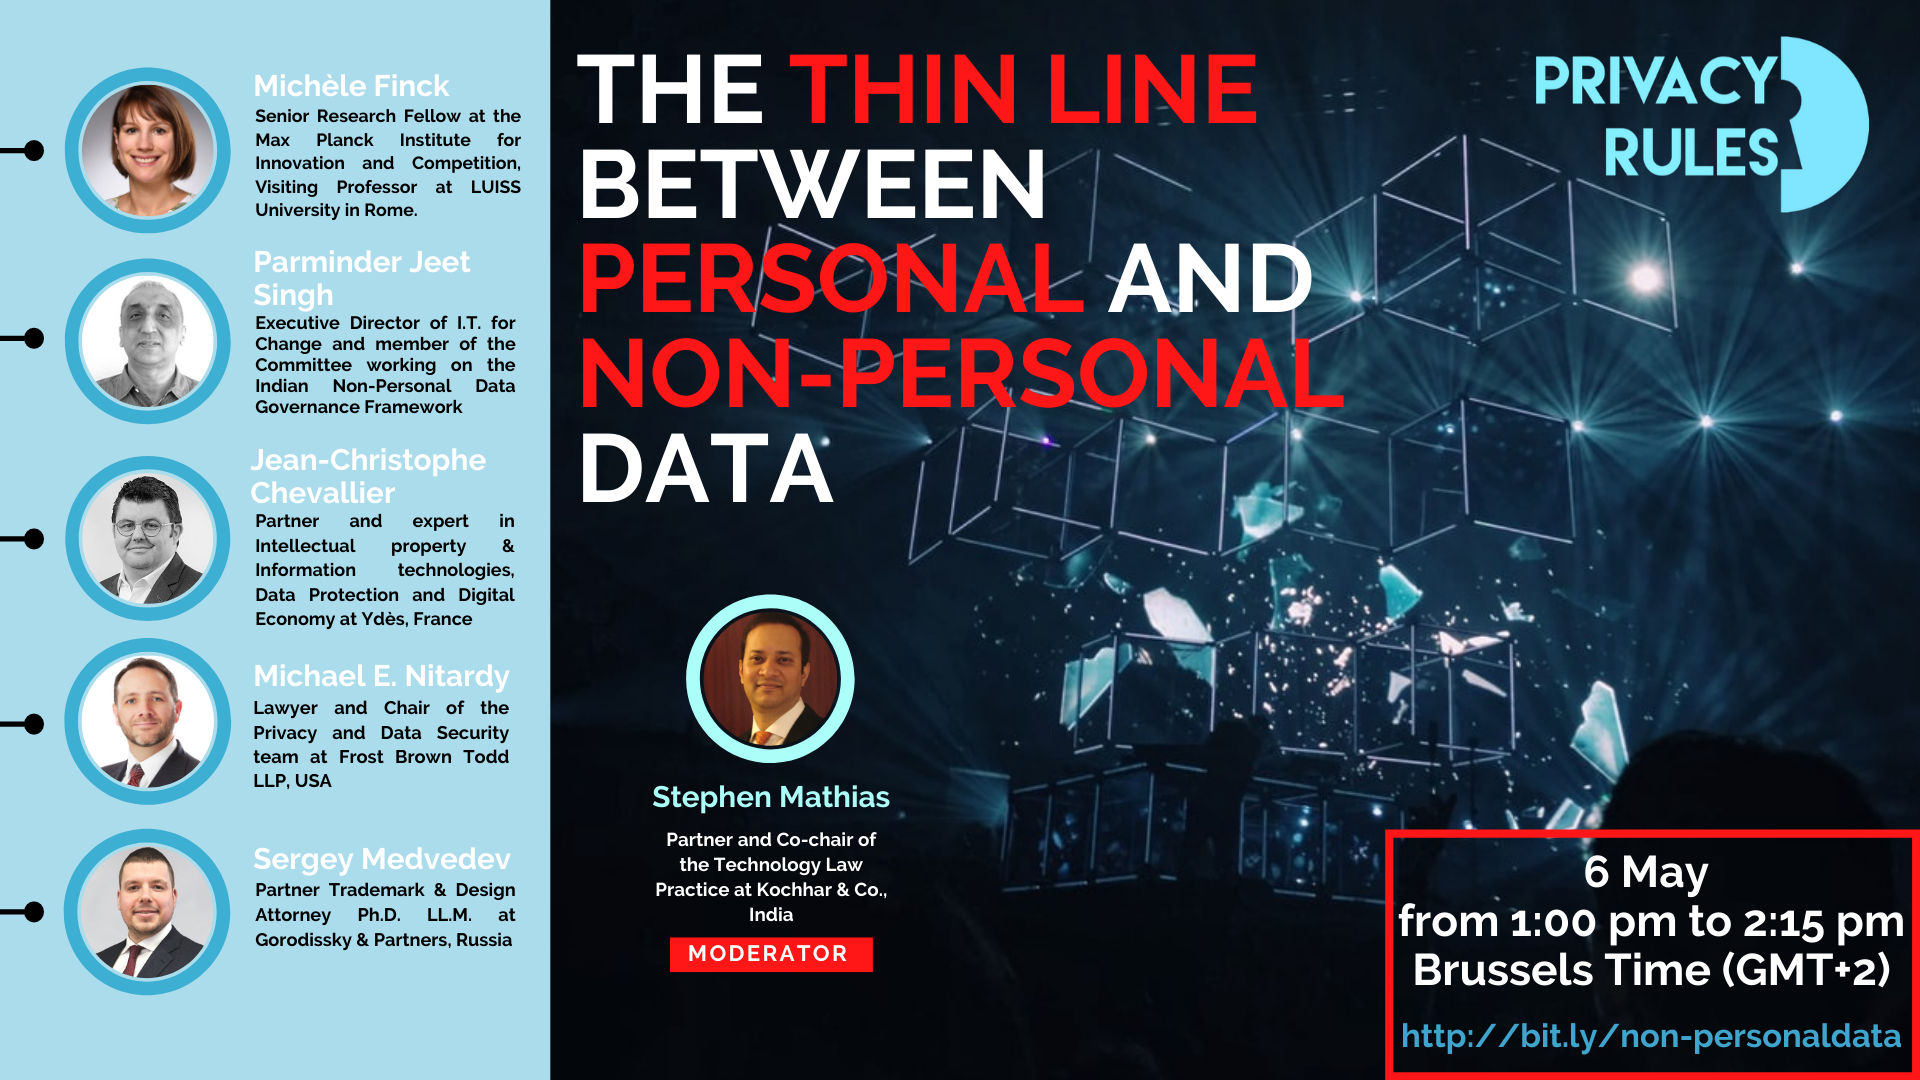 Thin line between personal and non-personal data